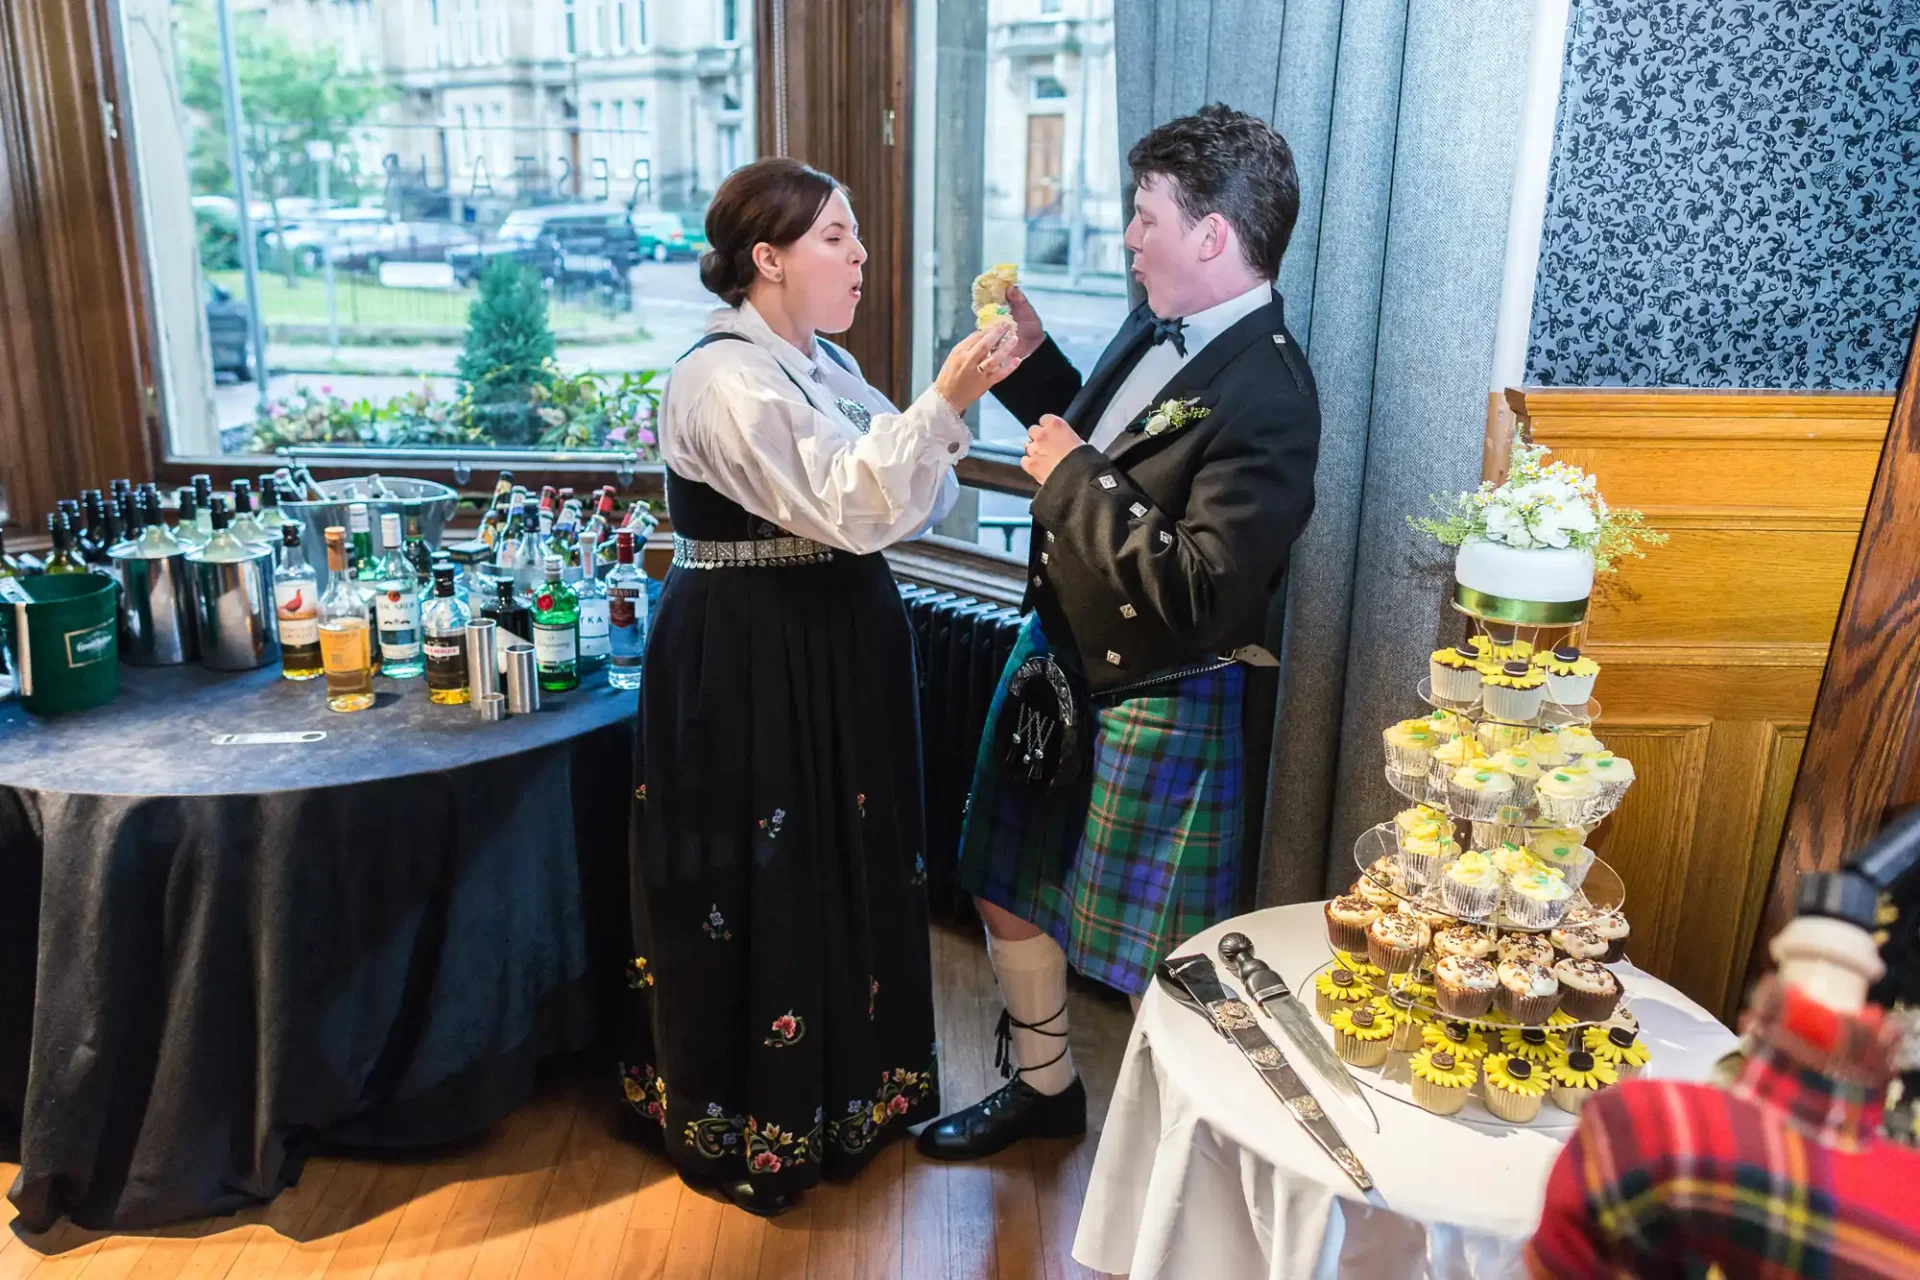 Two people in traditional scottish attire conversing beside a drinks table and cupcake stand at an indoor event.